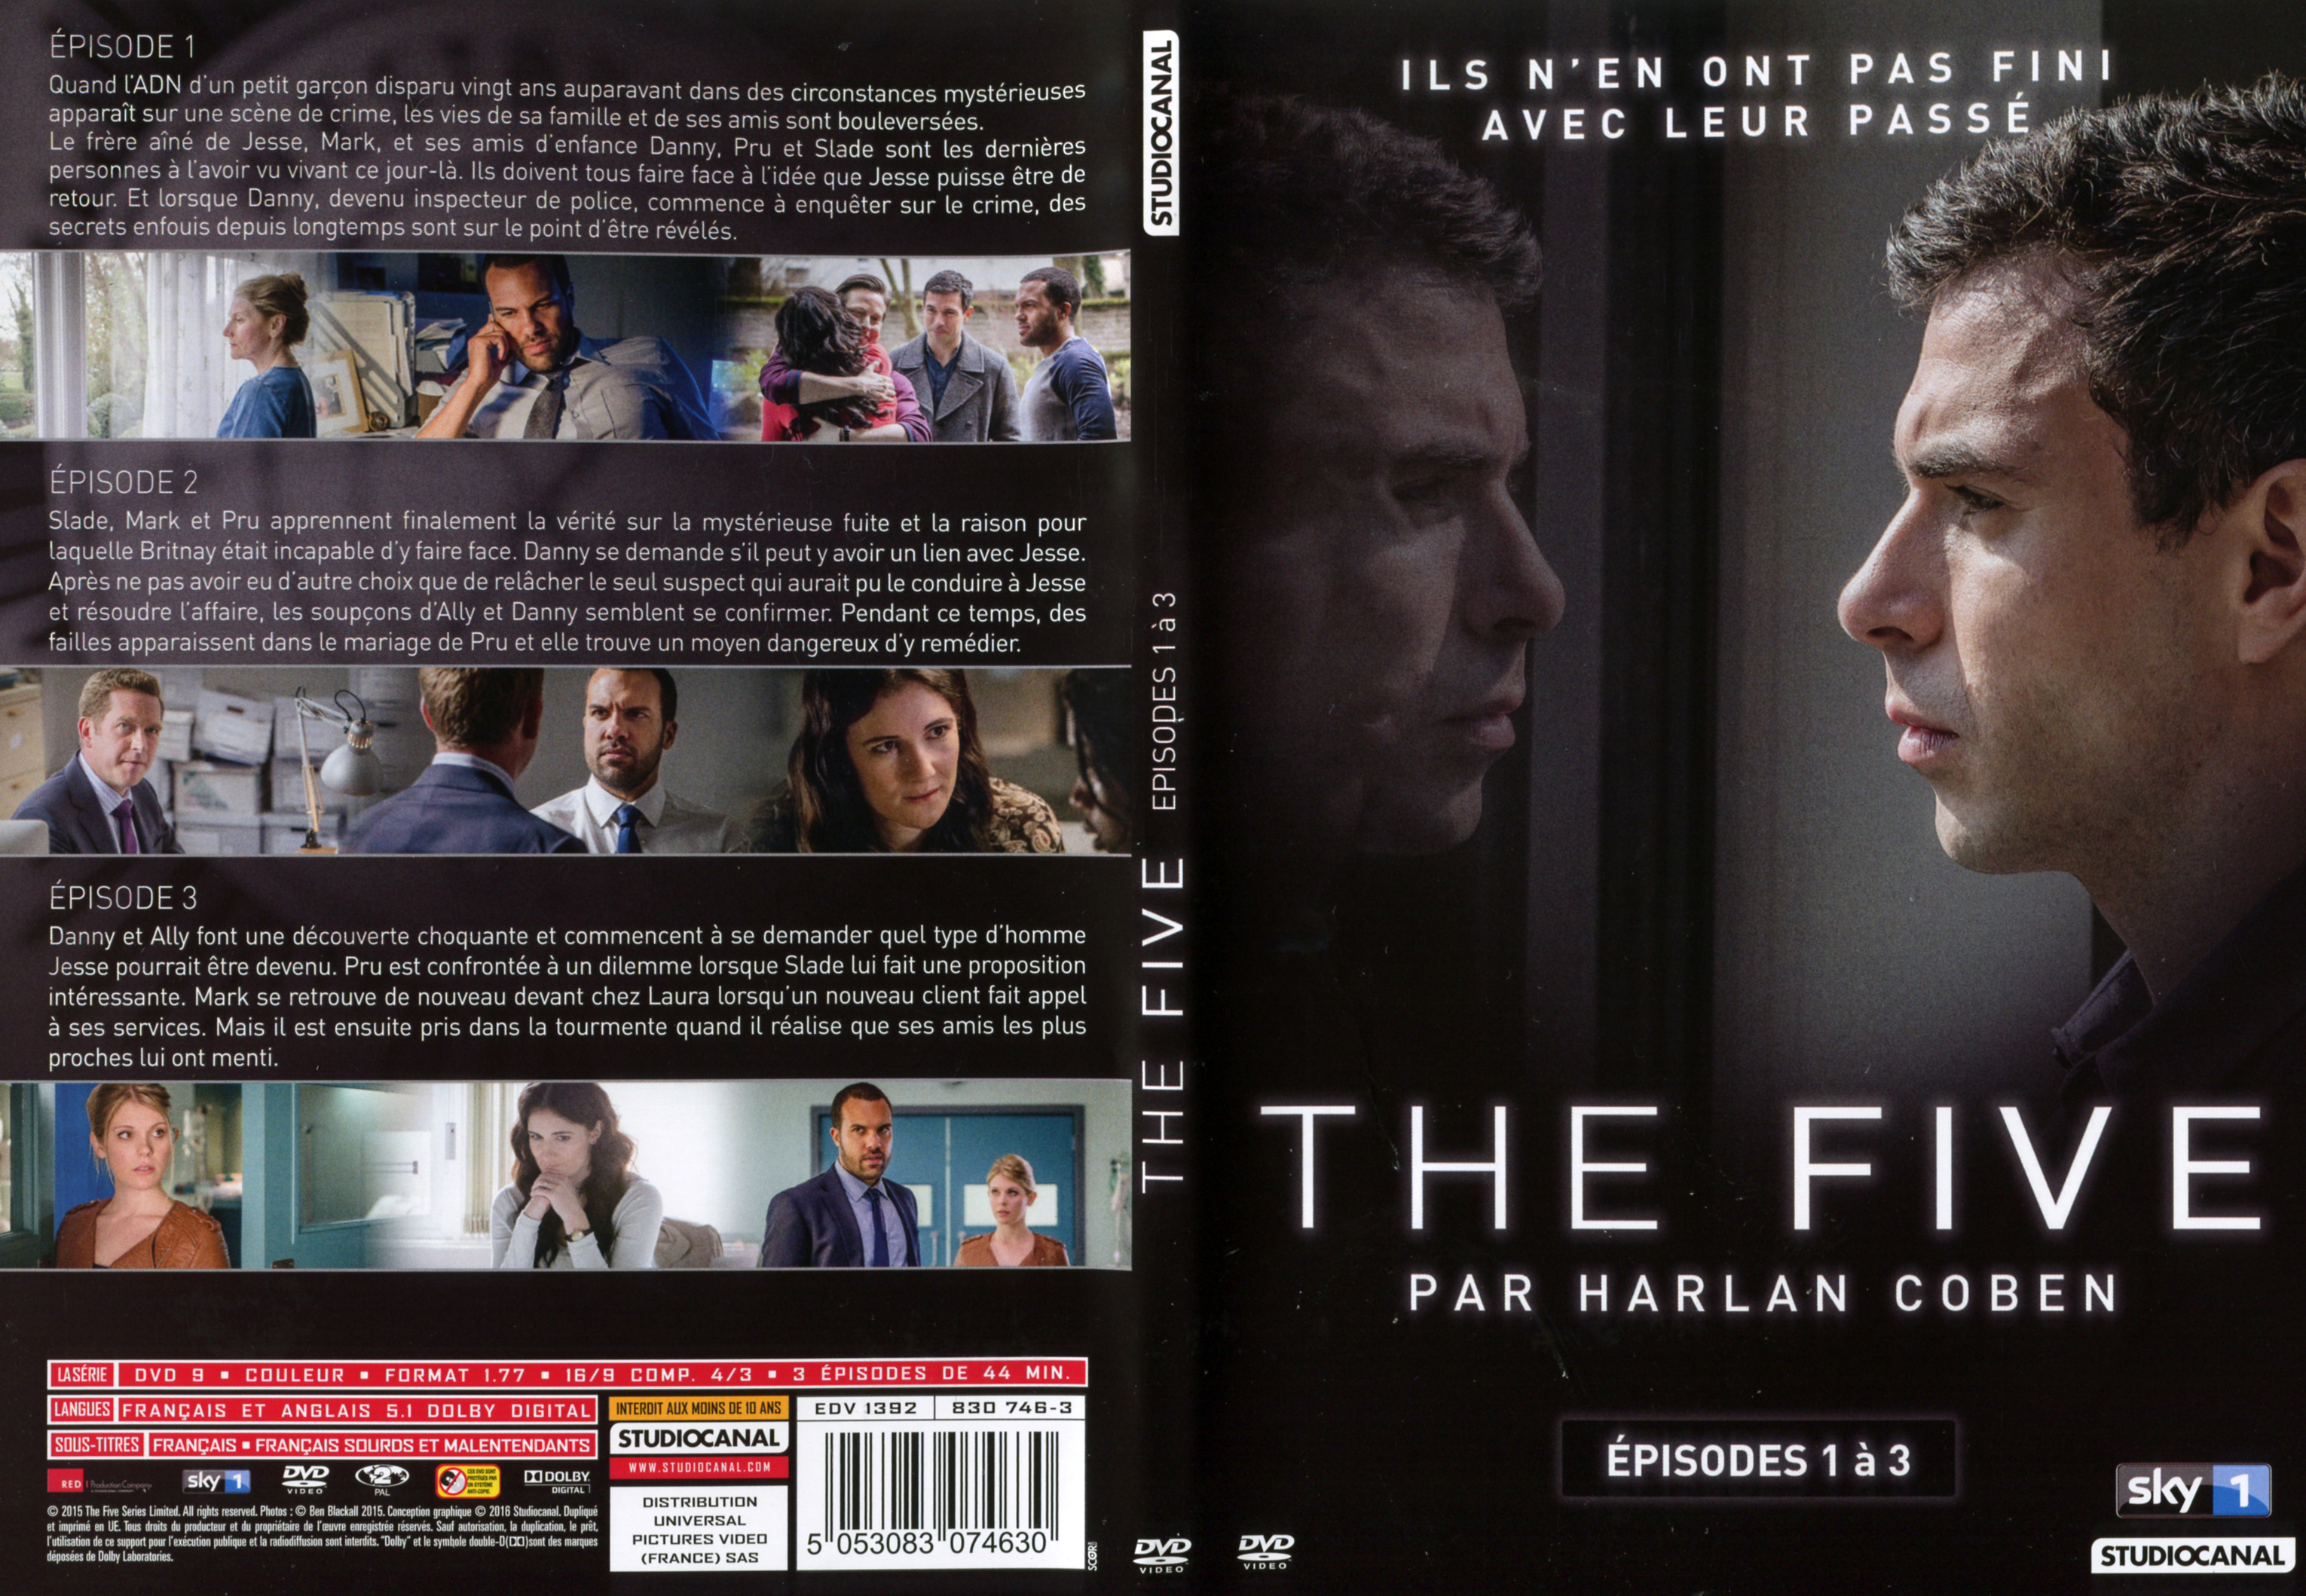 Jaquette DVD The five ep 1-3